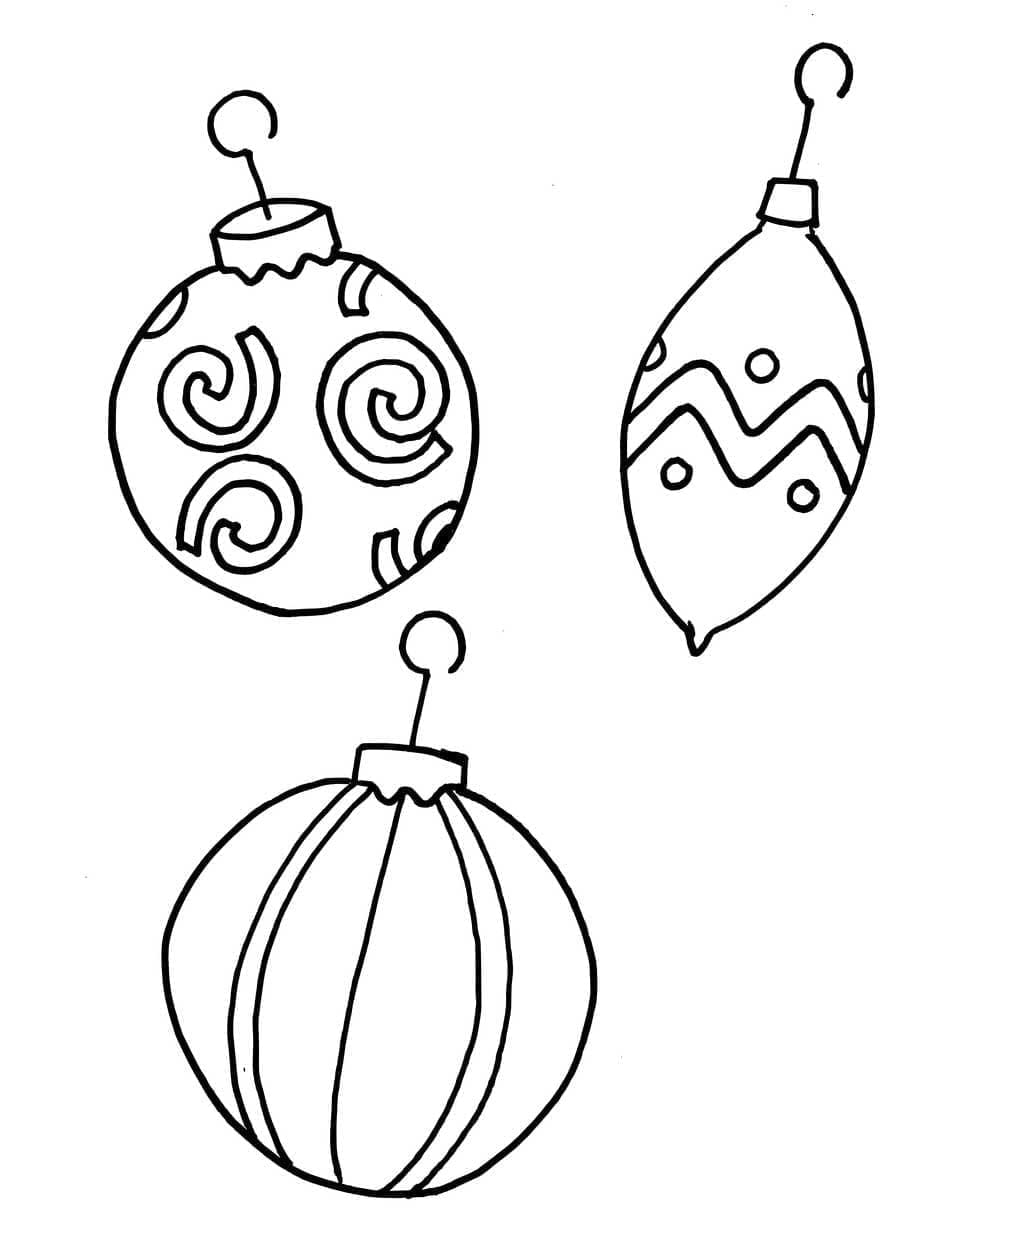 Christmas Ornaments Printable coloring page - Download, Print or Color ...